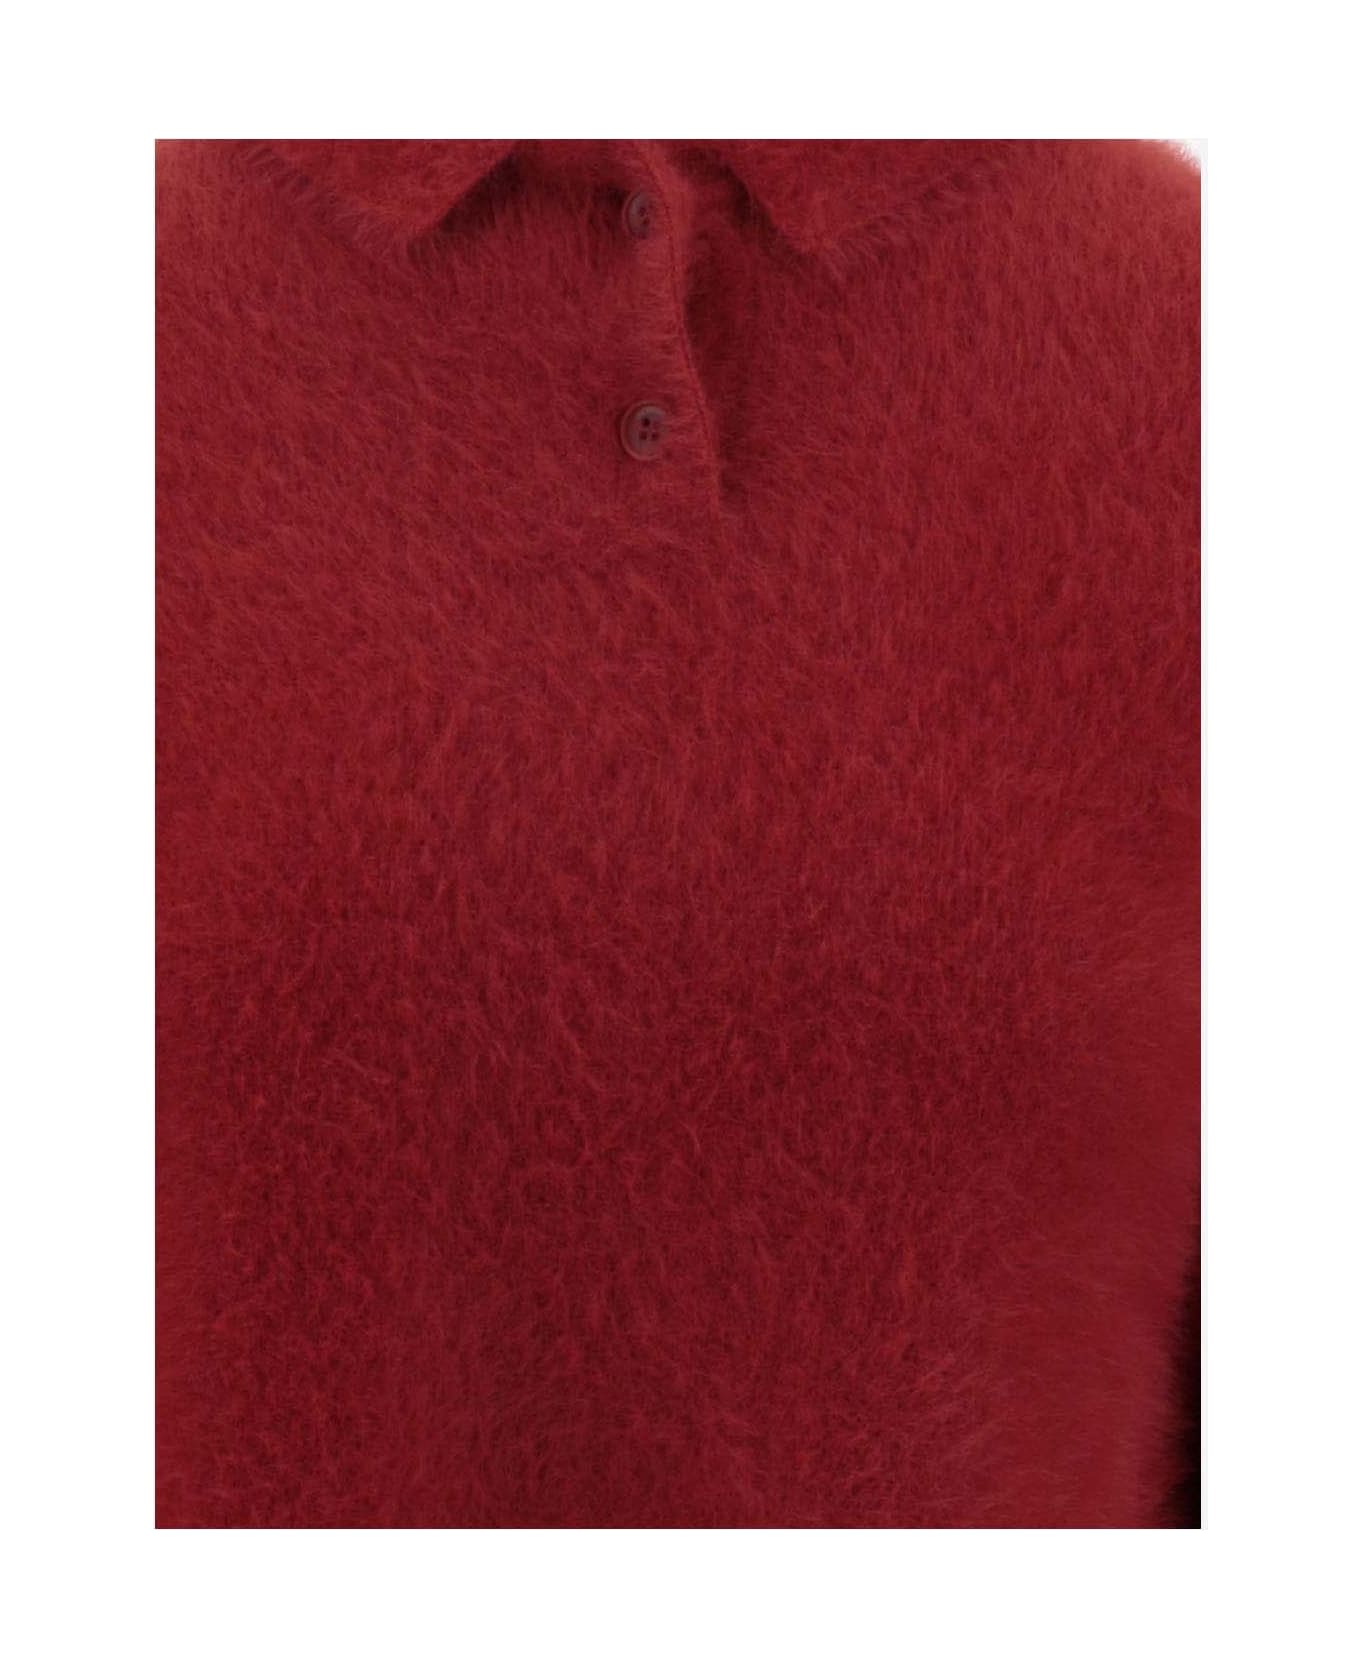 Jacquemus Le Polo Neve - Red